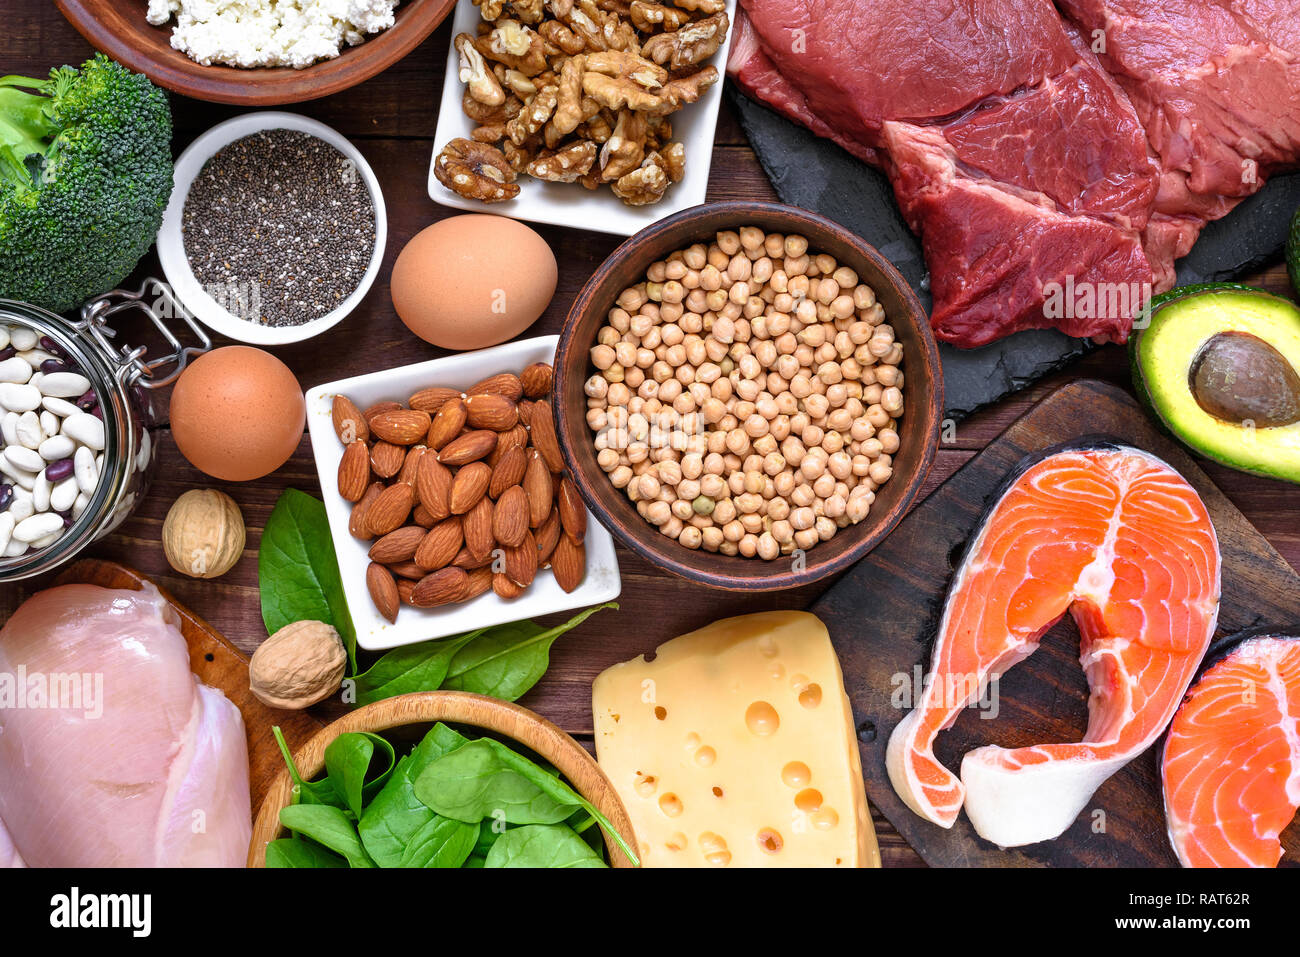 High protein food - fish, meat, poultry, nuts, eggs and vegetables. healthy eating and diet concept. top view Stock Photo